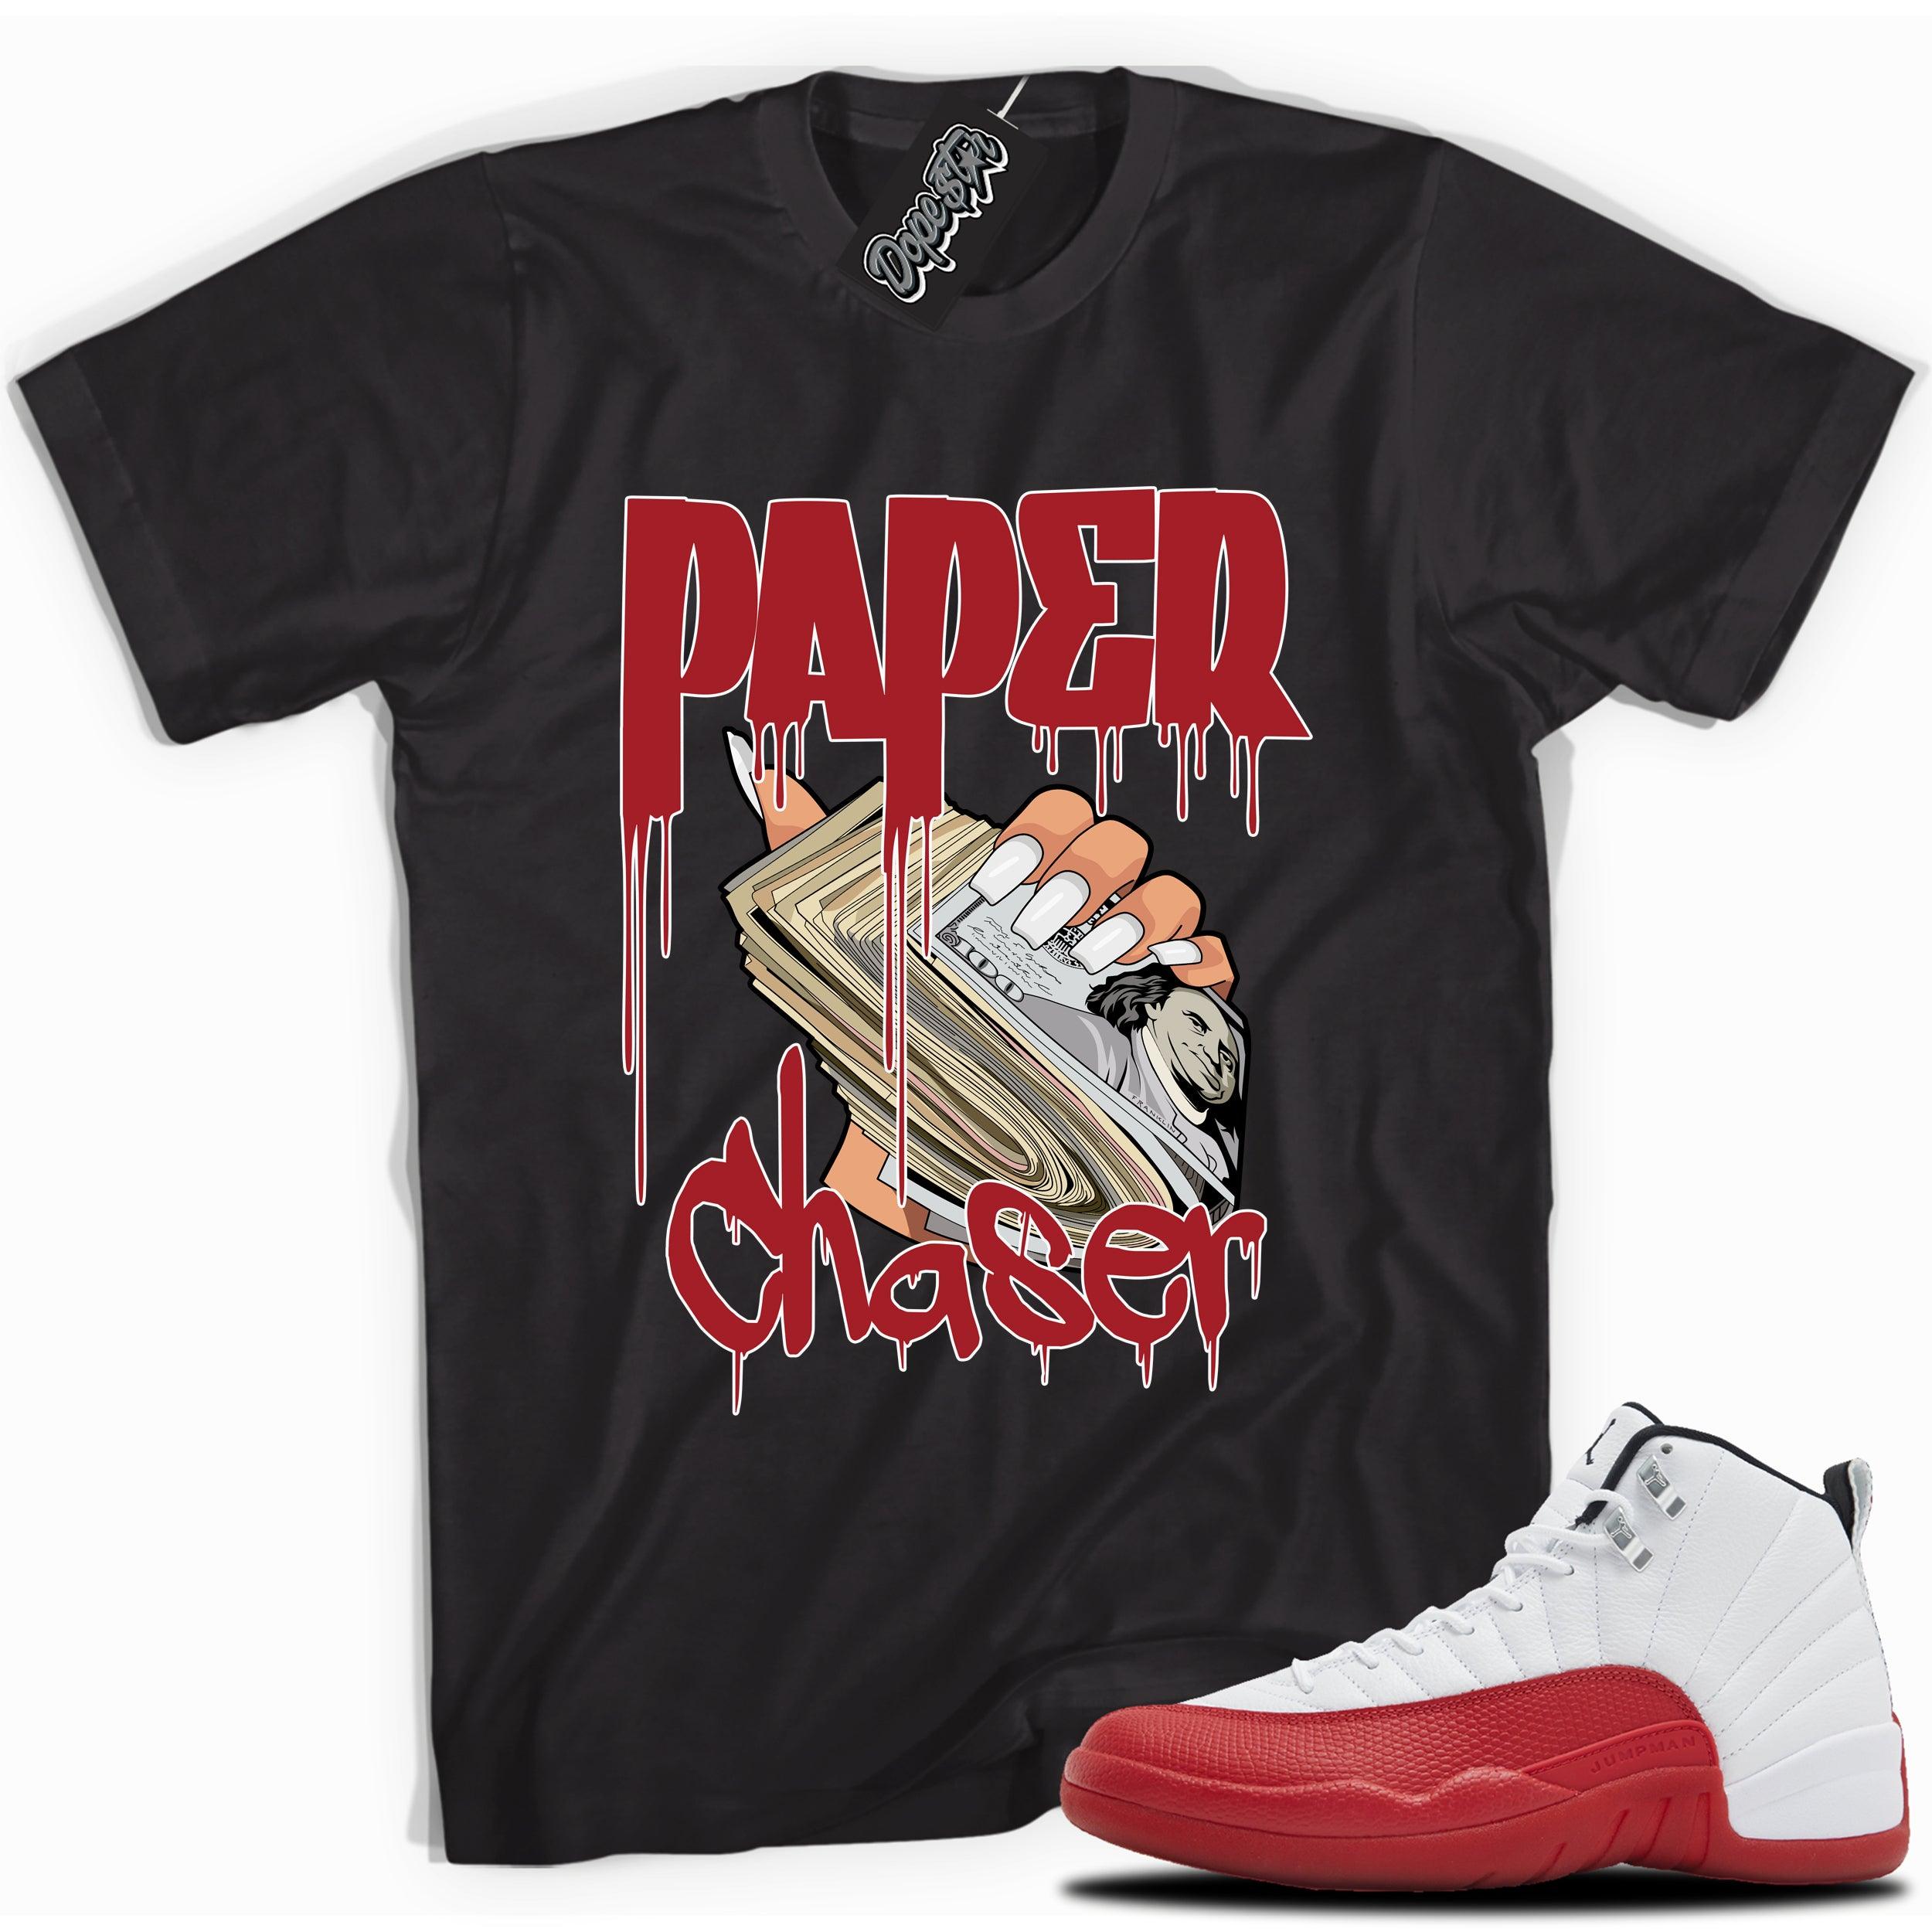 Cool Black graphic tee with “Paper Chaser” print, that perfectly matches Air Jordan 12 Retro Cherry Red 2023 red and white sneakers